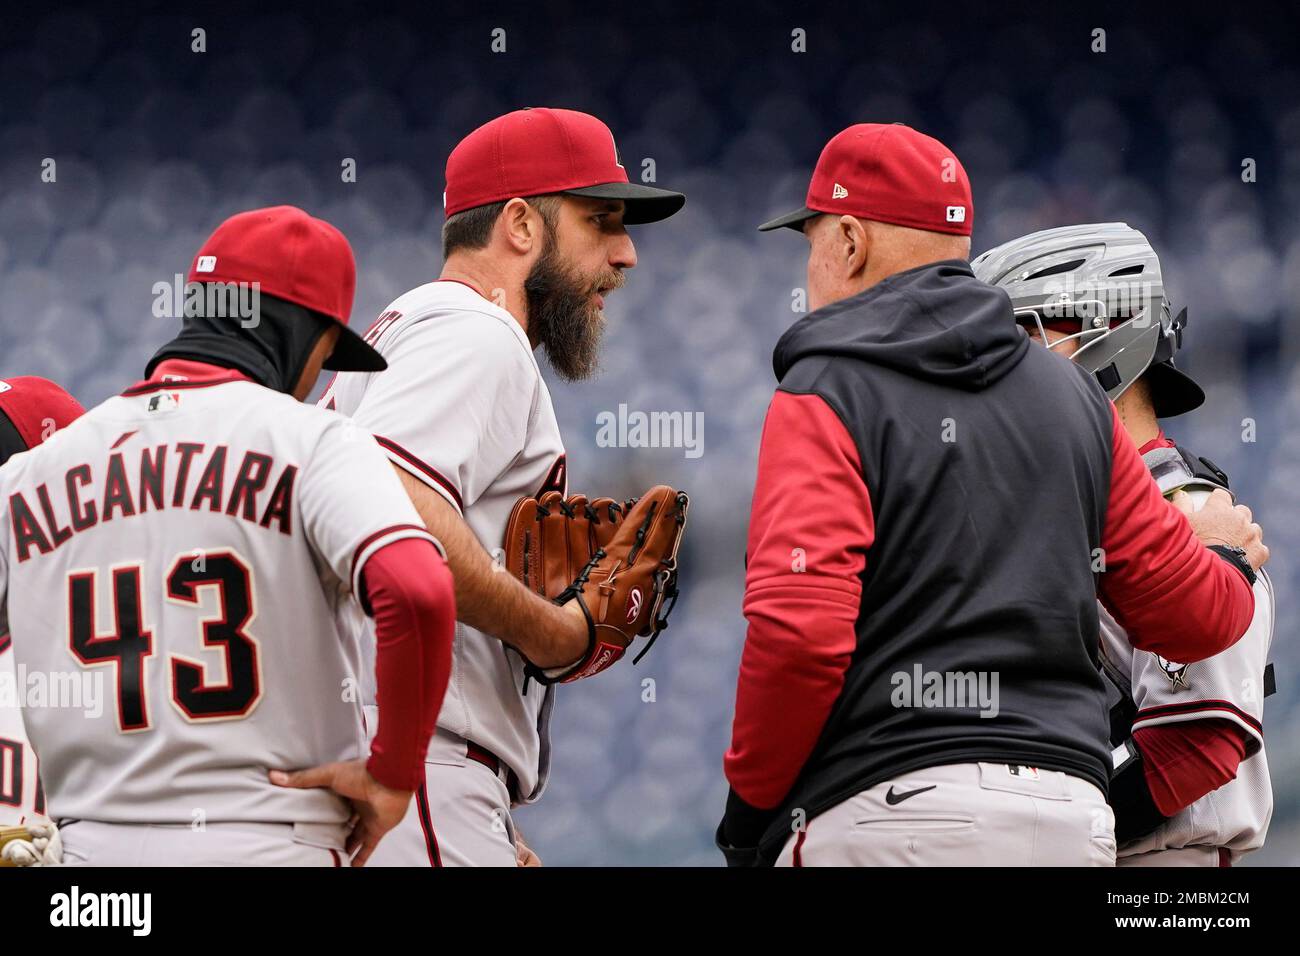 Arizona Diamondbacks starting pitcher Madison Bumgarner, second from left,  talks with Arizona Diamondbacks pitching coach Brent Strom, second from  right, on the mound during the first game of a baseball doubleheader at